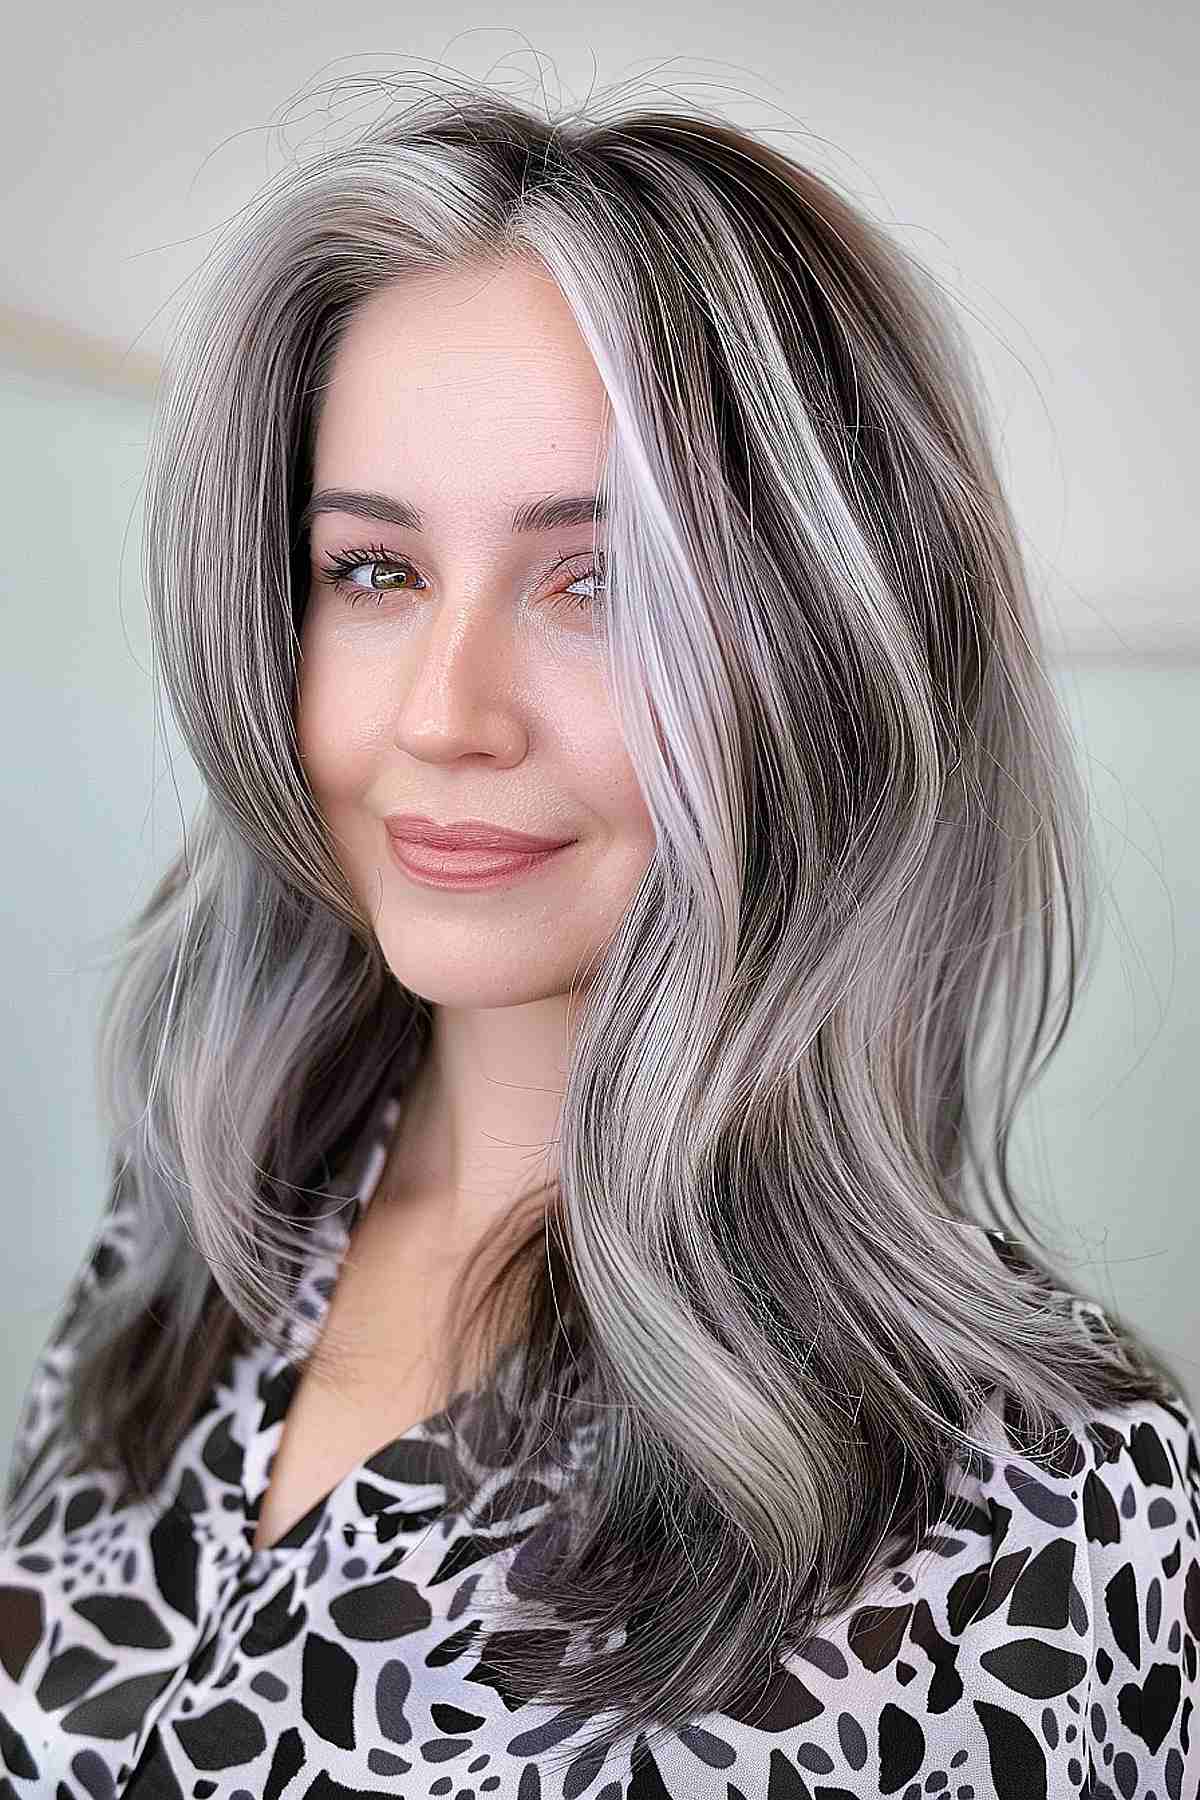 Medium-length hair with gray-blonde chunky highlights and soft waves